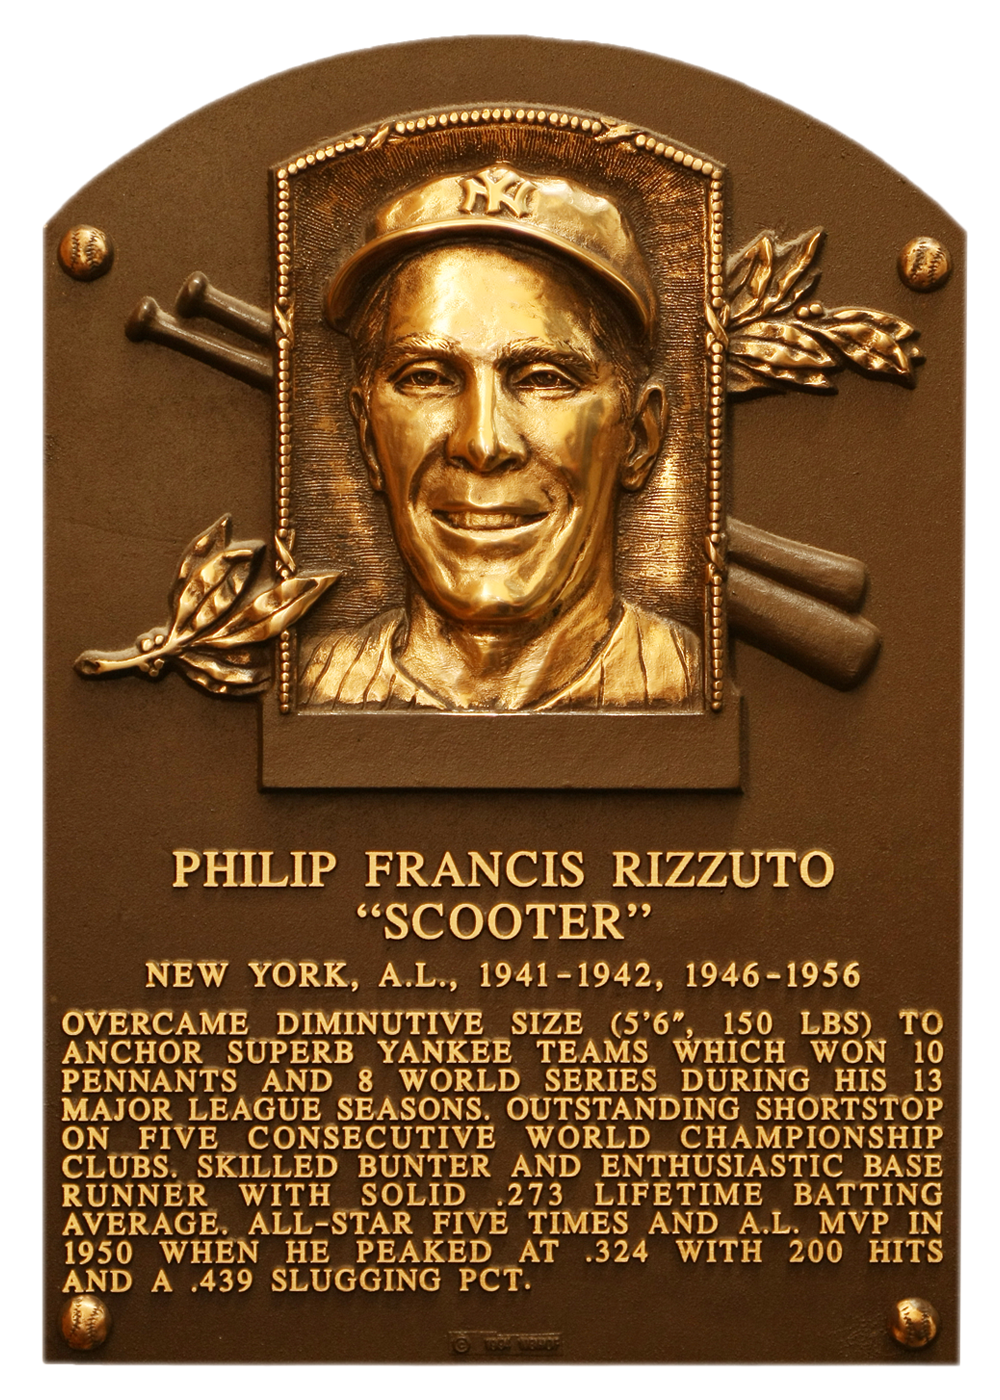 Phil Rizzuto Hall of Fame plaque